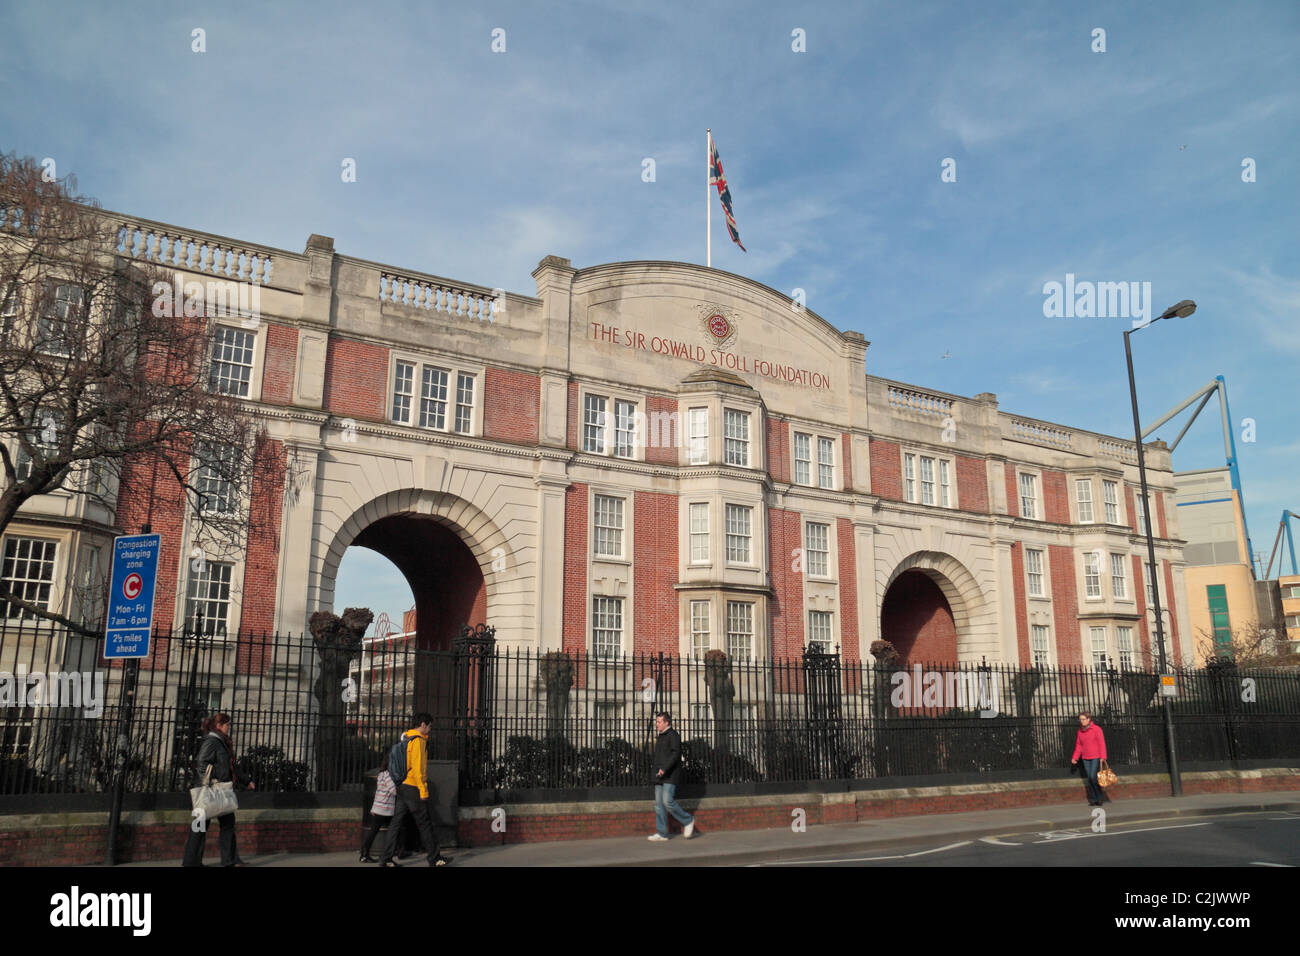 External view of The Sir Oswald Stoll Foundation building on the Fulham Road, Chelsea, London, UK. Stock Photo